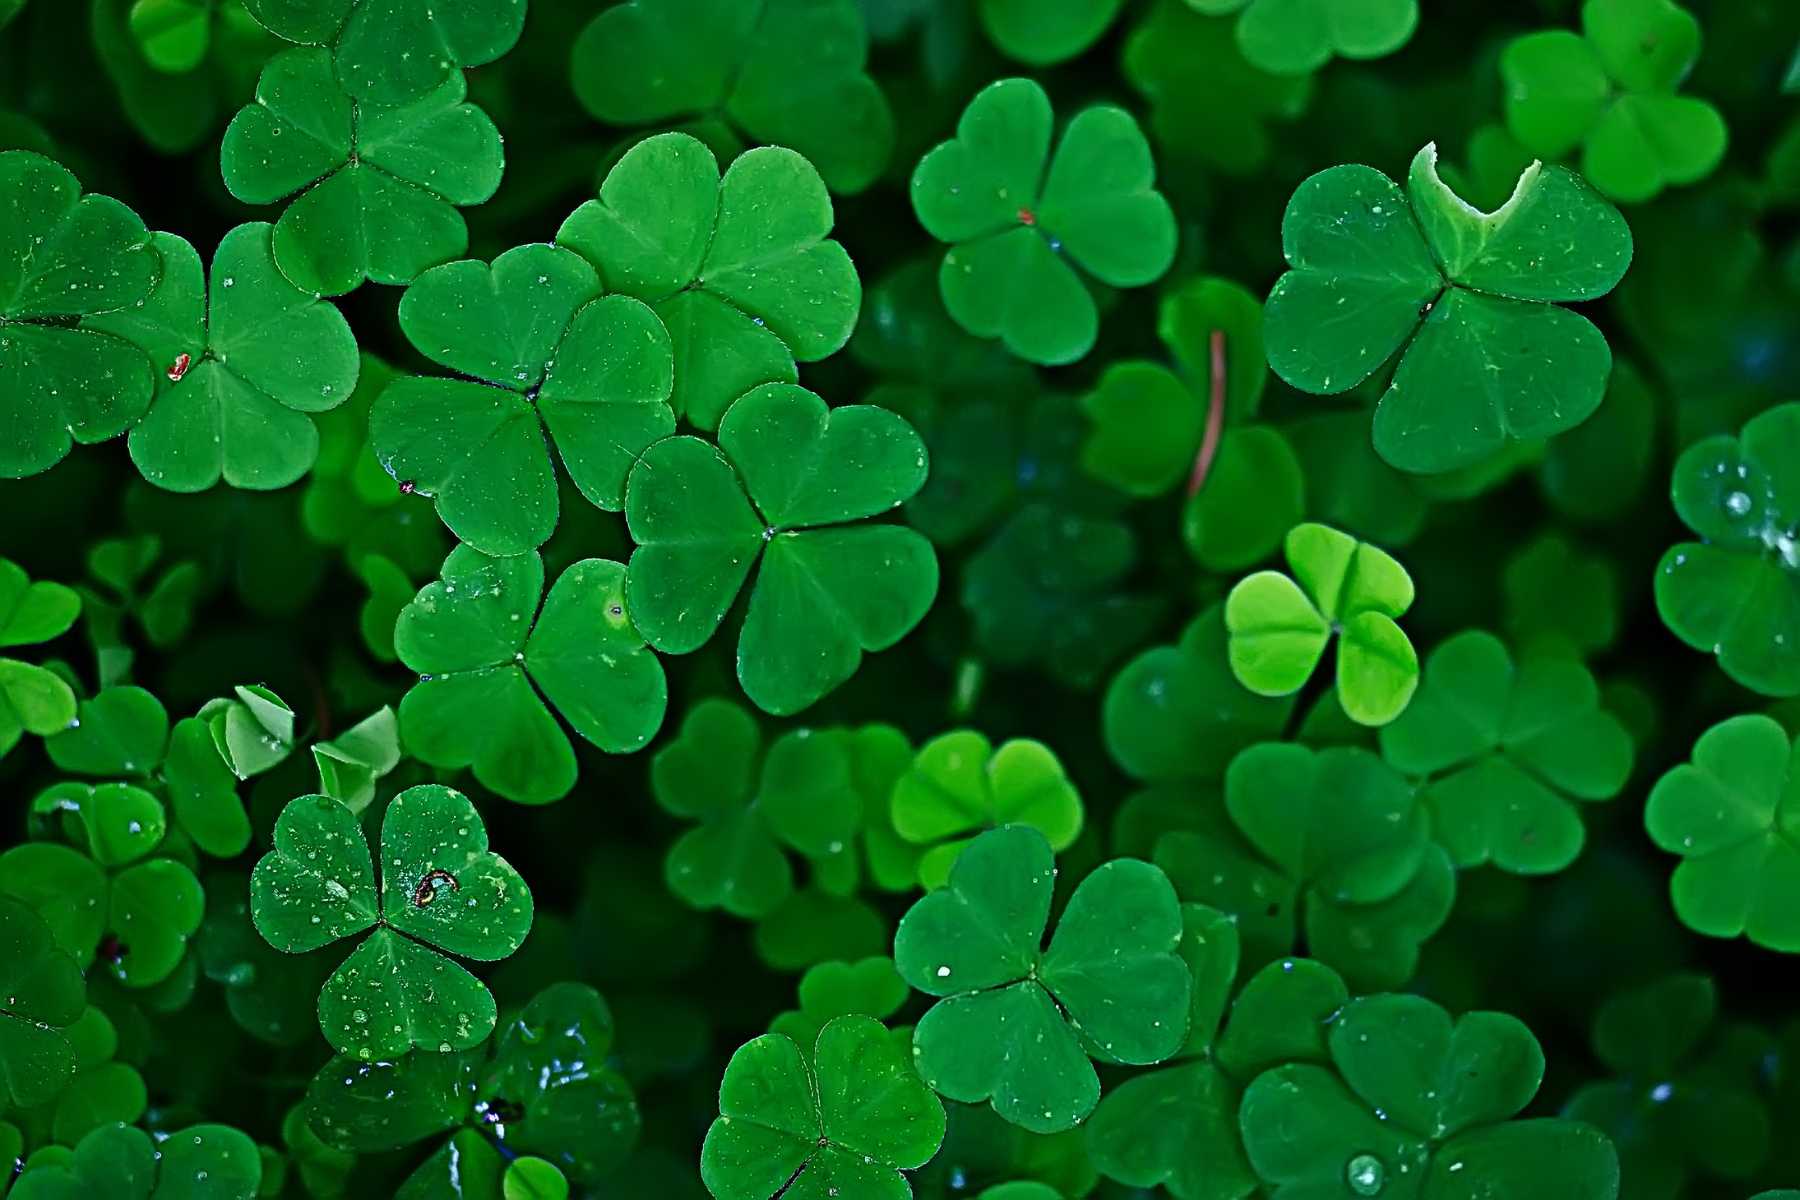 What's the best way to find a four-leaf clover?